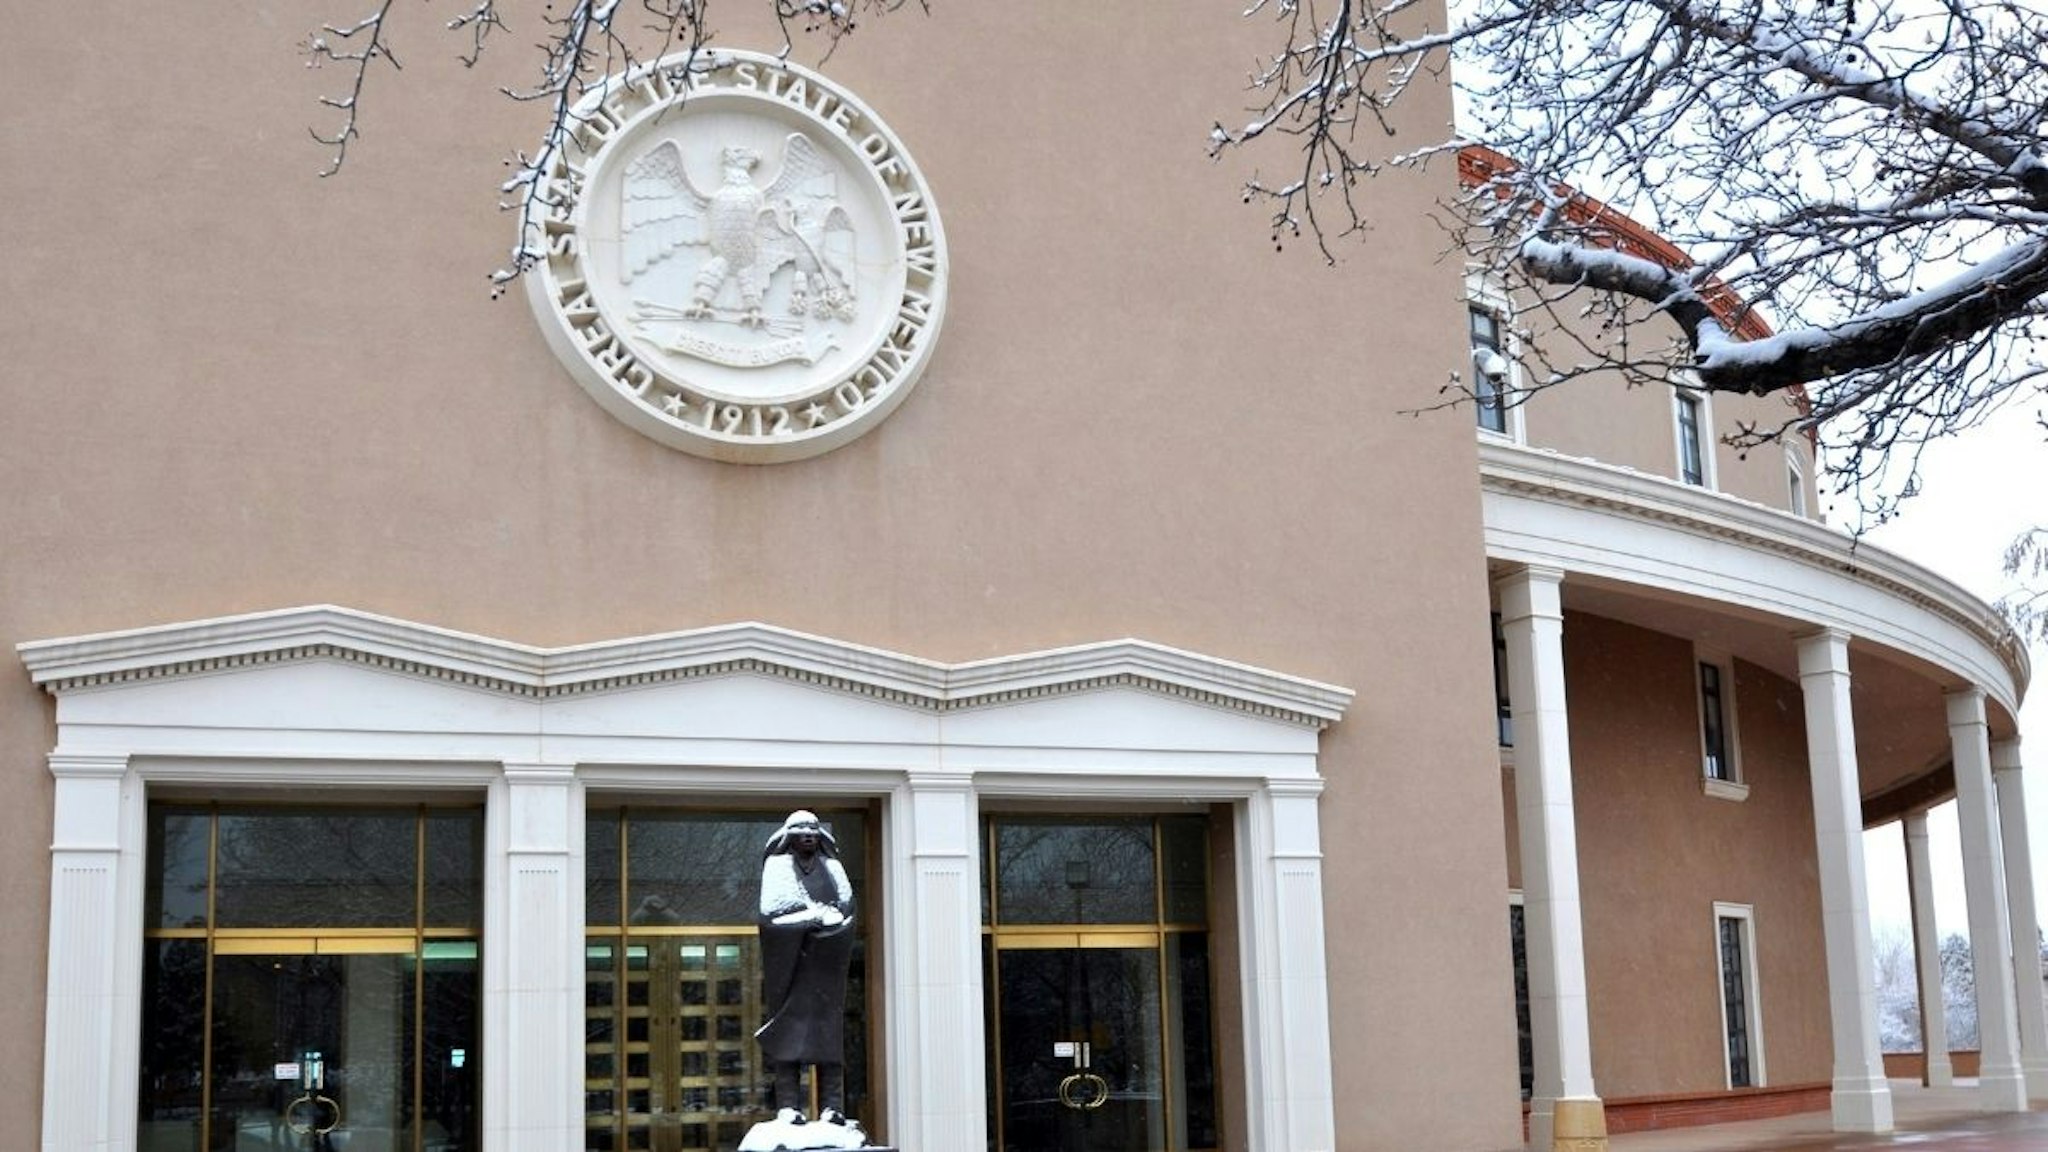 The New Mexico State Capitol in Santa Fe, known as the Roundhouse, is the only round capitol building in the U.S.